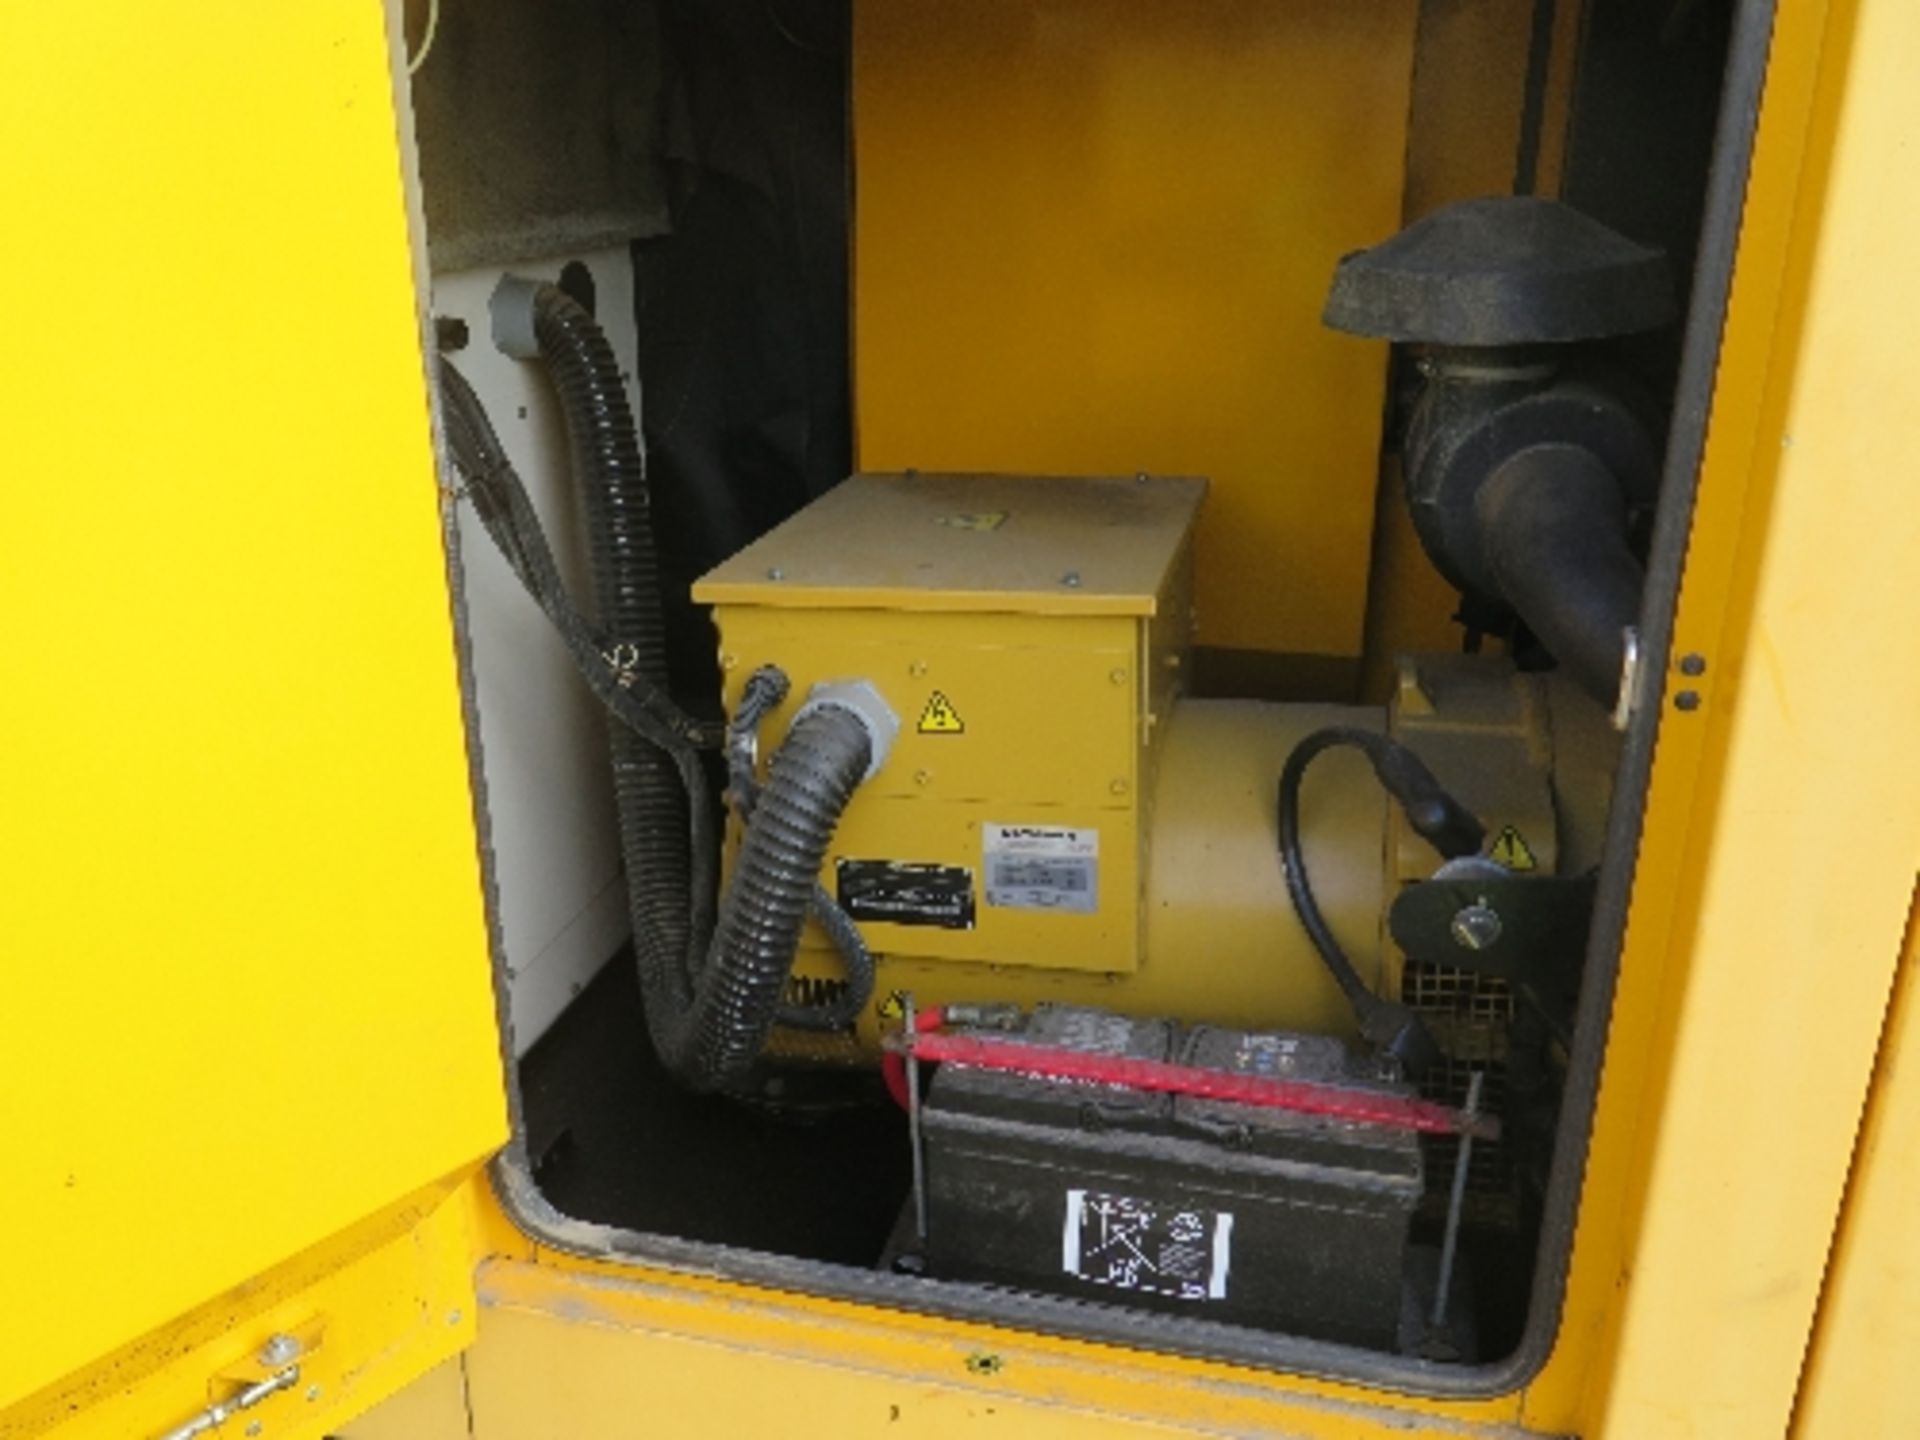 Caterpillar XQE80 generator 10433 hrs 145934
PERKINS - RUNS AND MAKES POWER
ALL LOTS are SOLD AS - Image 5 of 6